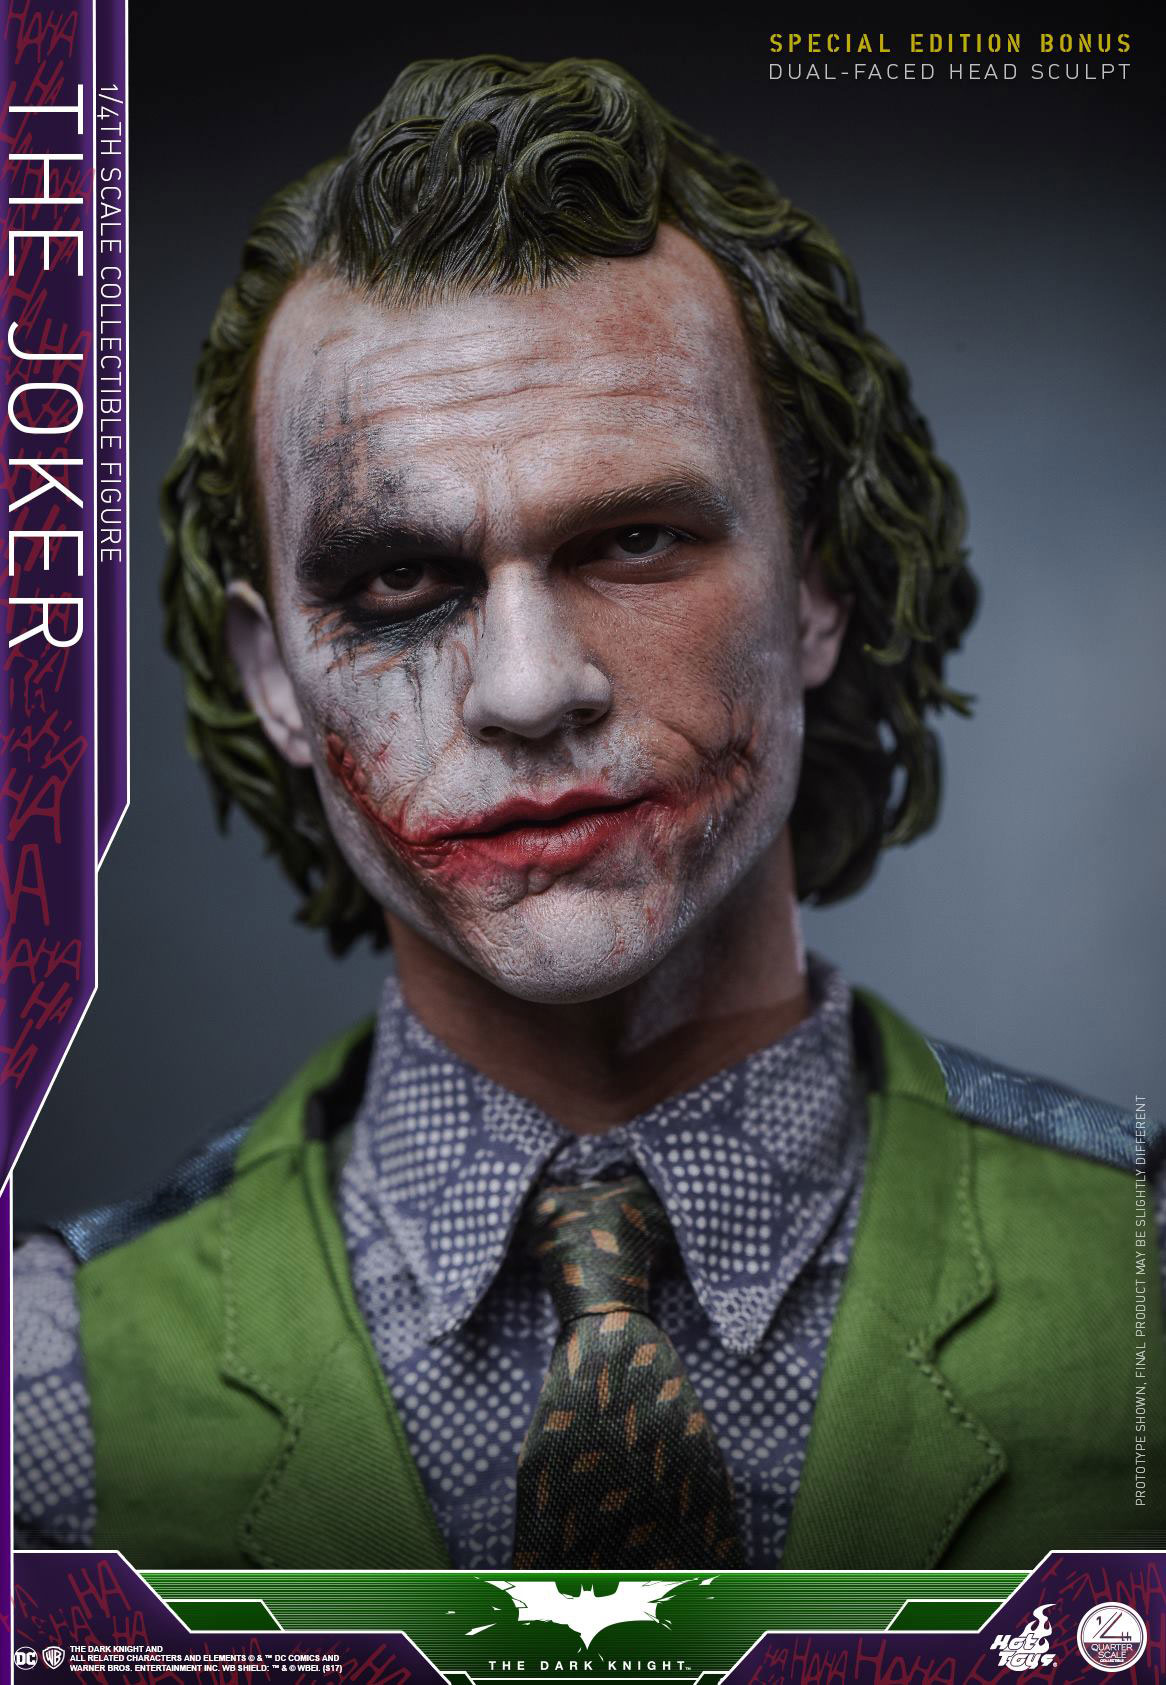 The Dark Knight The Joker Figure by Hot Toys | ActionFiguresDaily.com